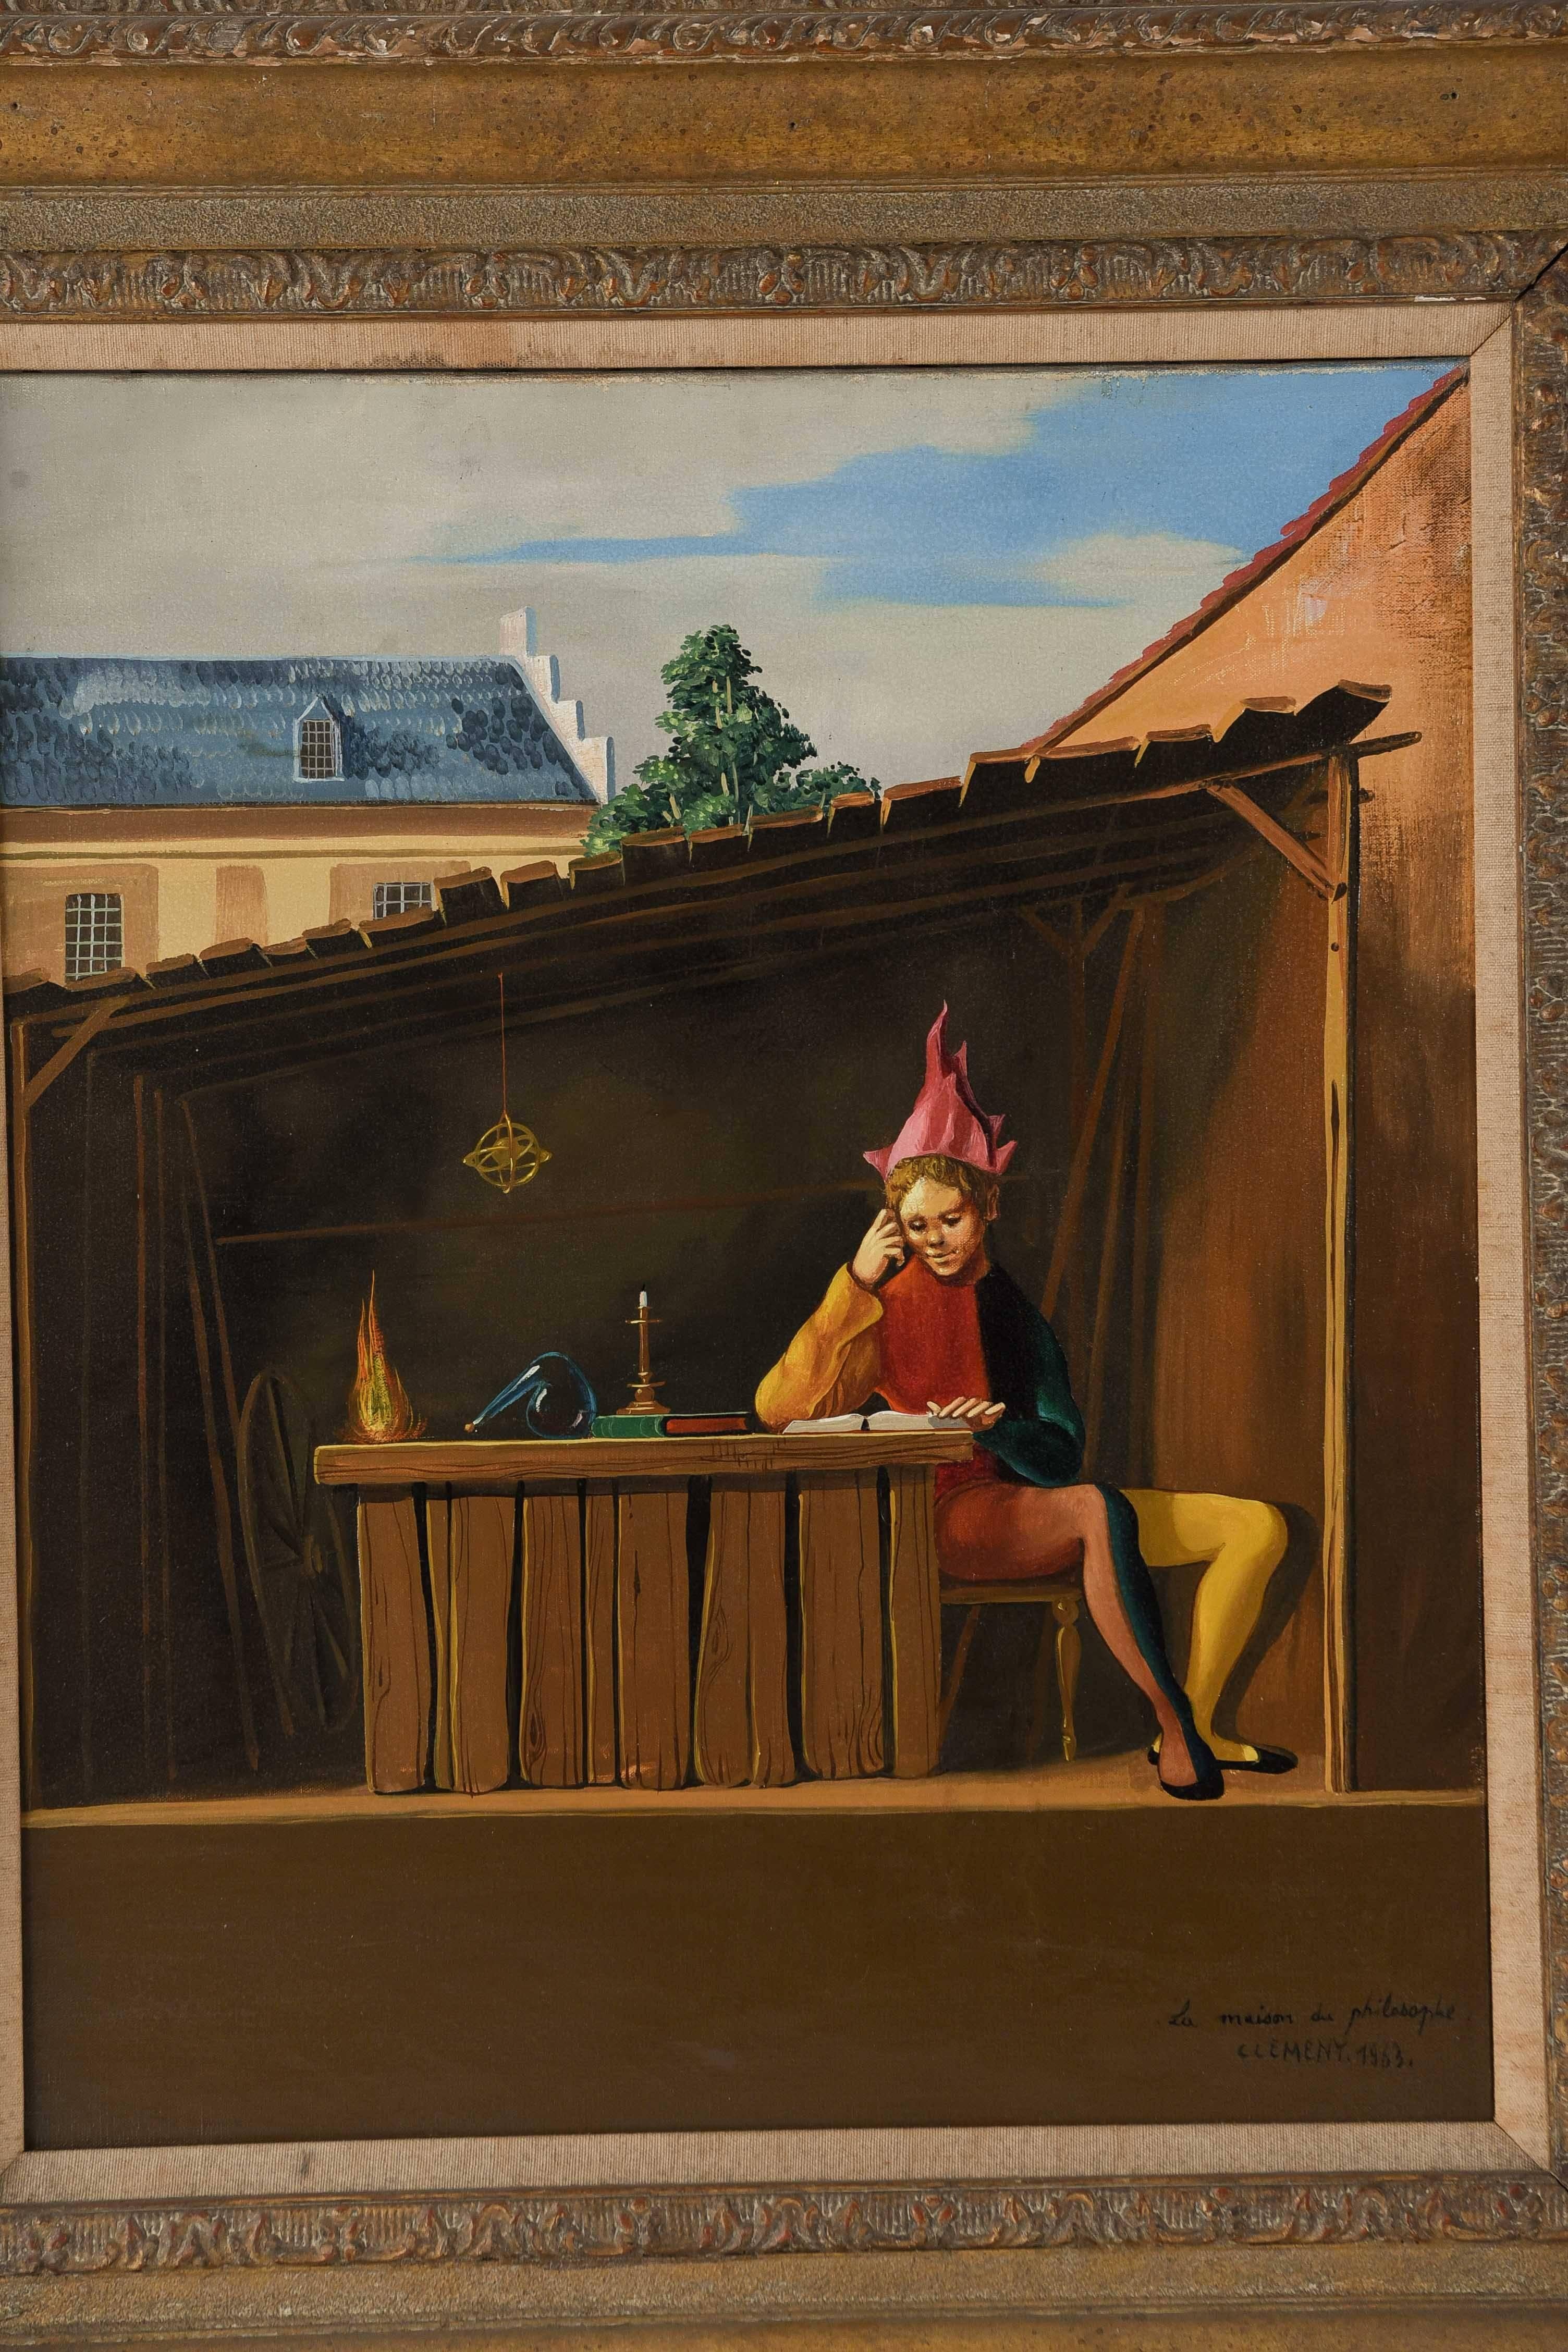 A surrealist painting by listed French artist Jean Pierre Clement depicting a male figure in jester-like clothing and a light red headdress. He appears to be reading inside a small, covered shed next to an unlit candle.

Titled 